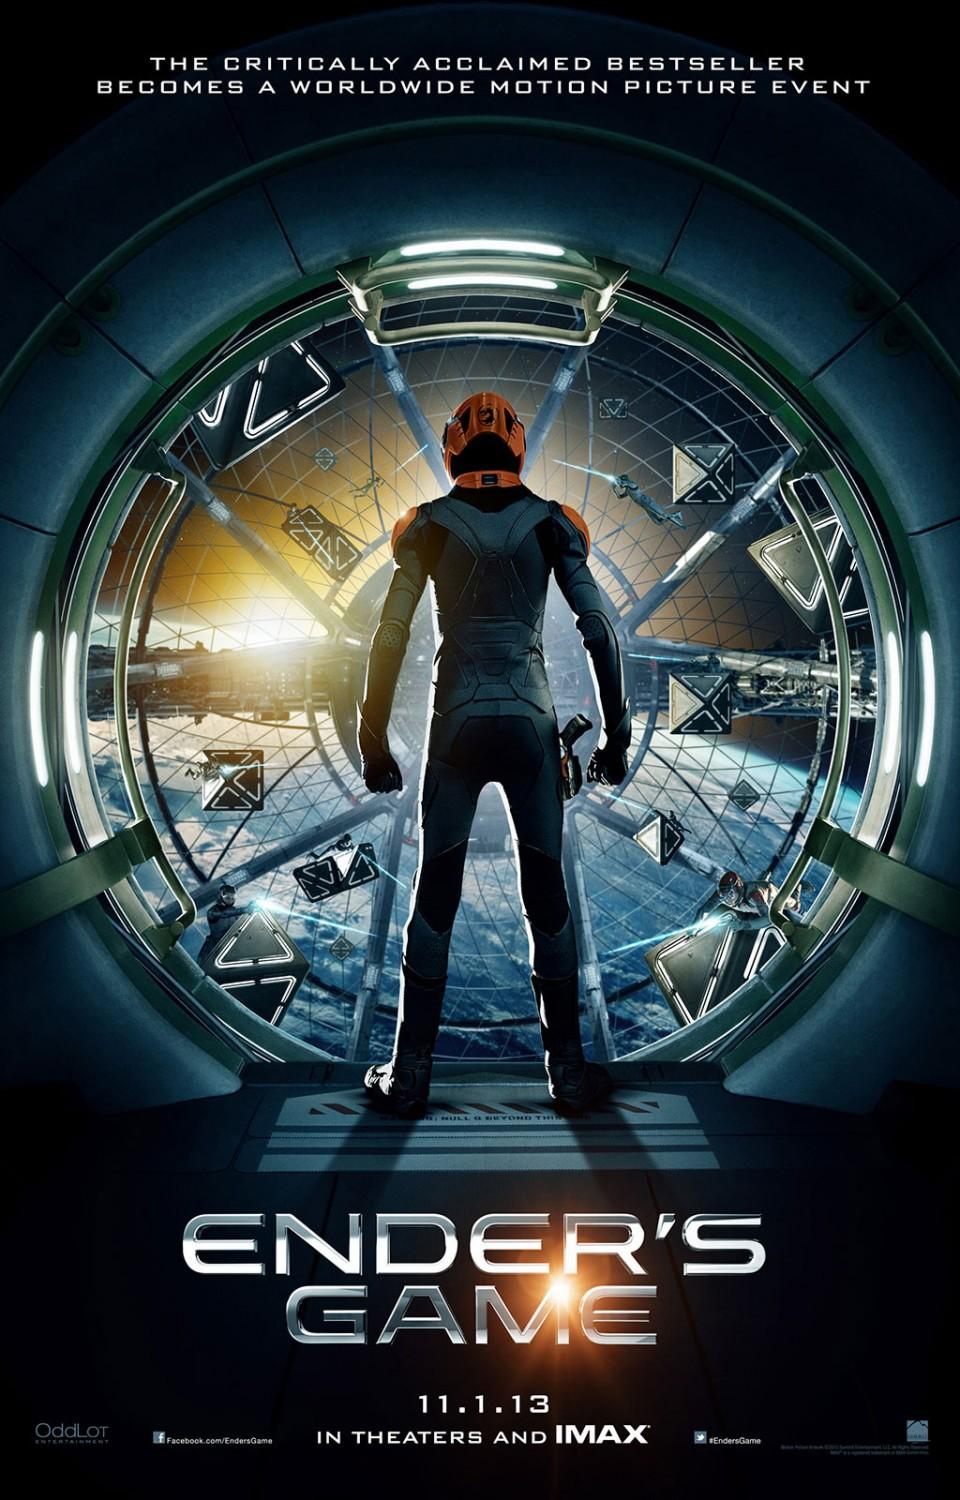 Ender's Game (2013) – AYJW039 - Are You Just Watching?